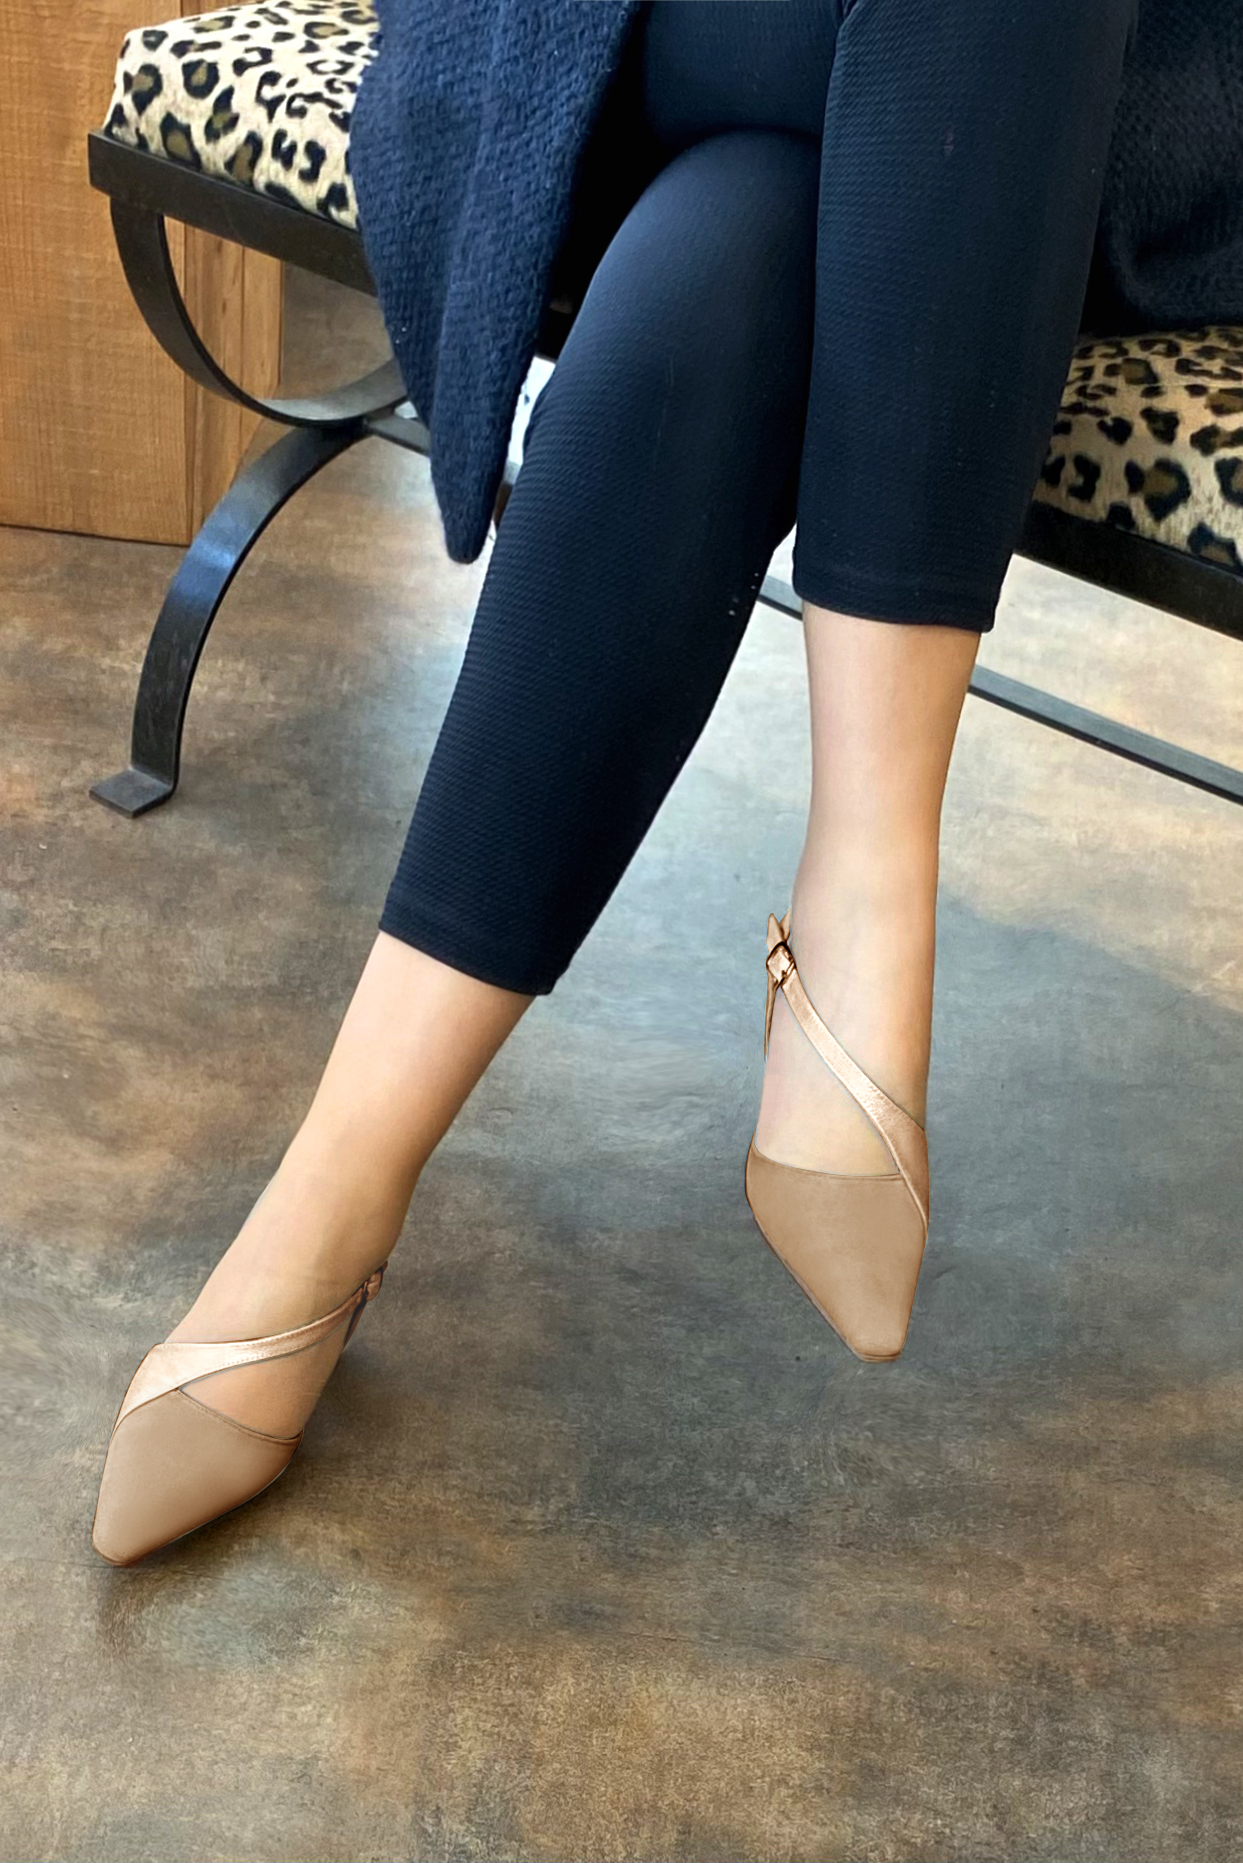 Tan beige and powder pink women's open back shoes, with an instep strap. Tapered toe. Medium comma heels. Worn view - Florence KOOIJMAN